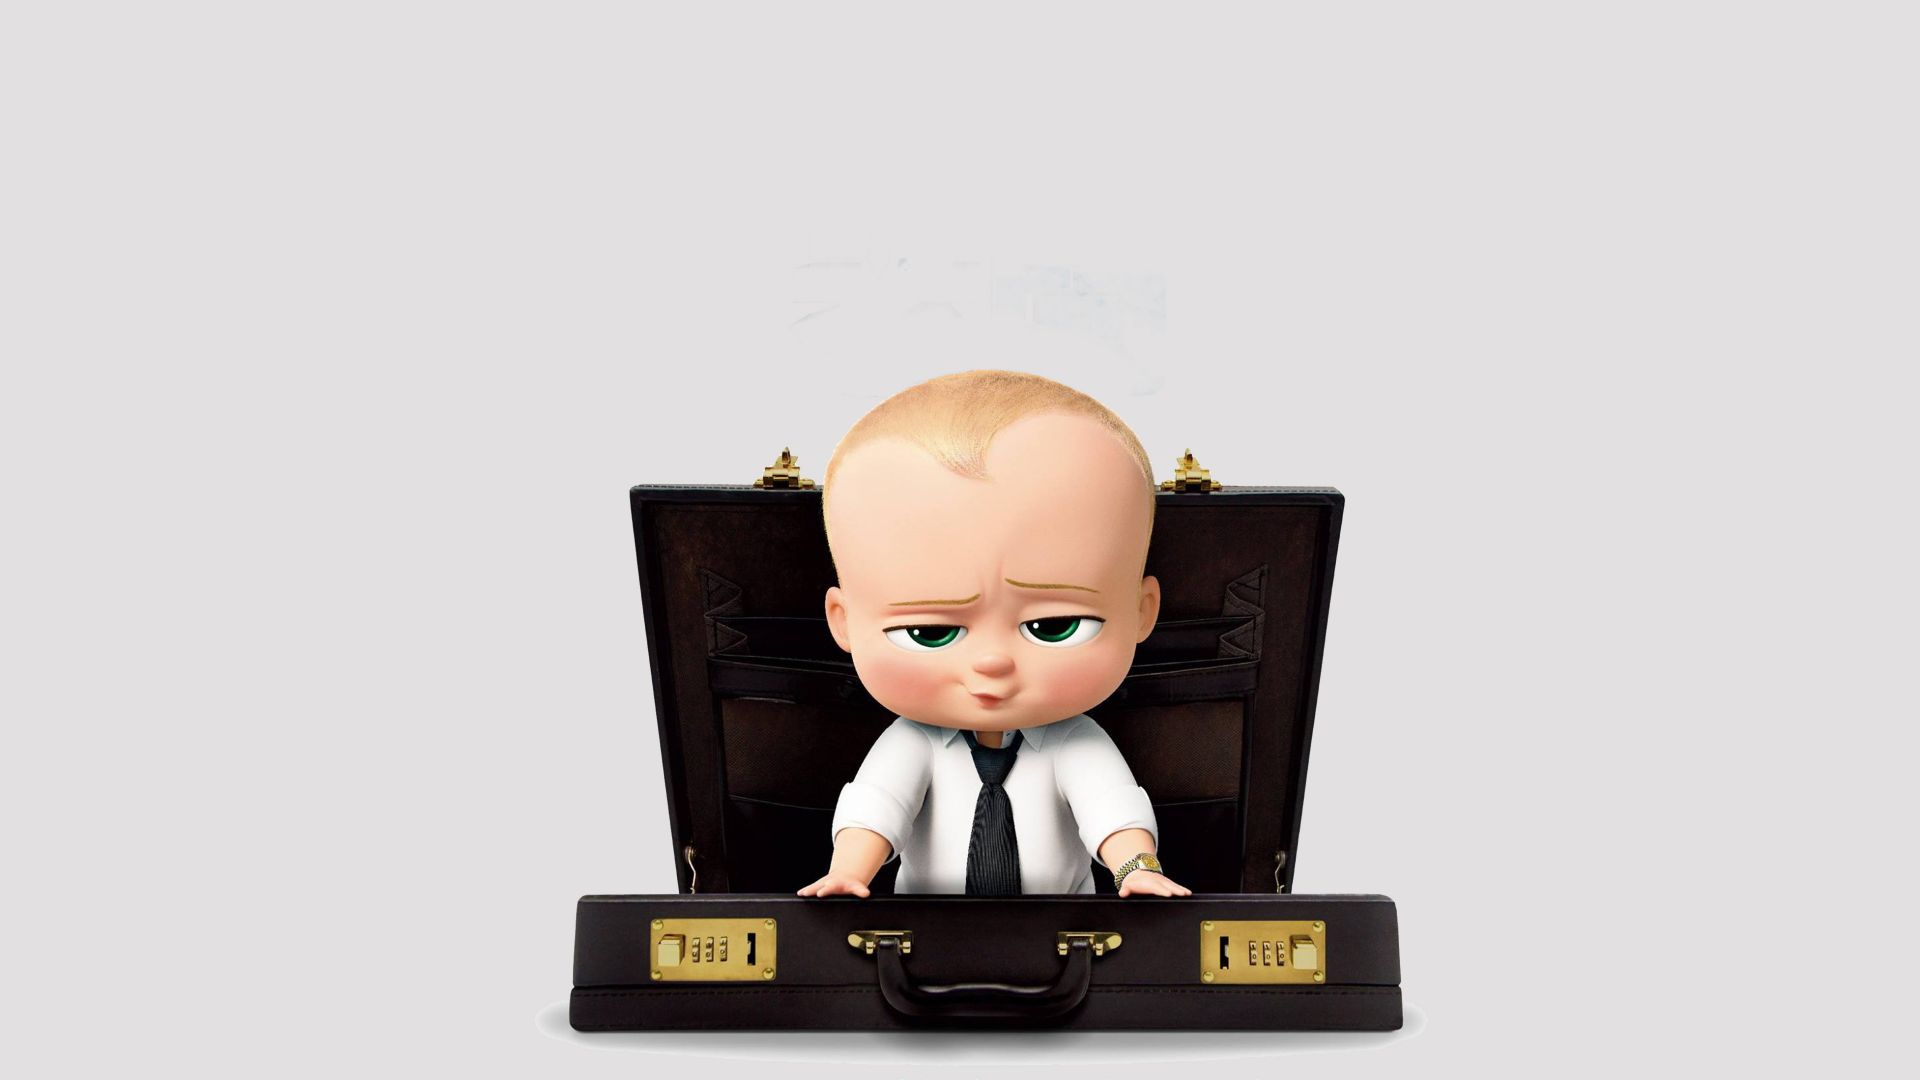 Wallpaper The Boss Baby 2017 animation movie